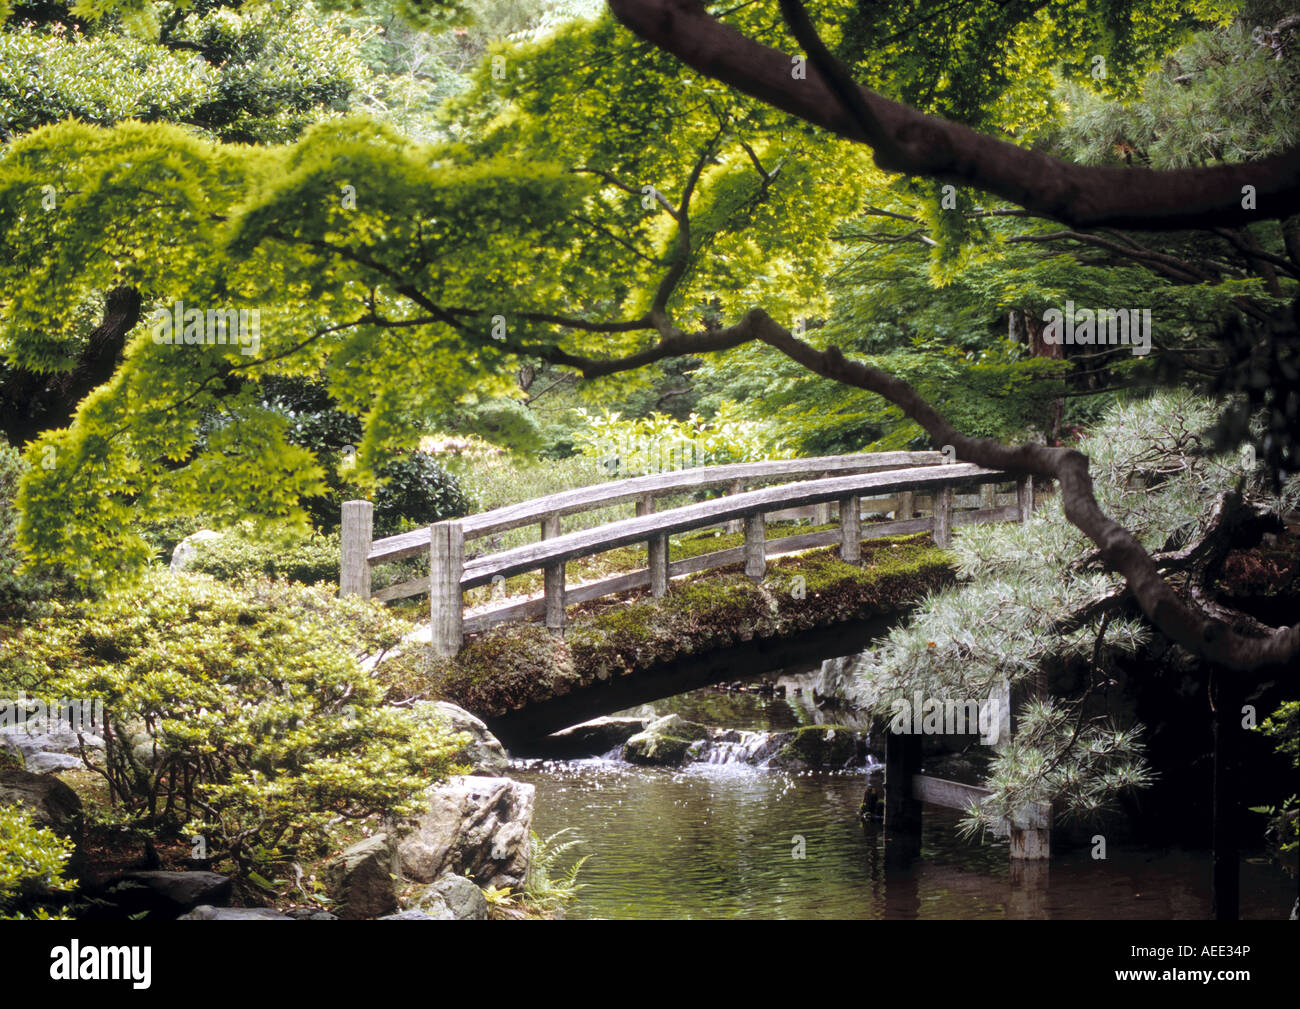 Imperial Palace Garden Stock Photo